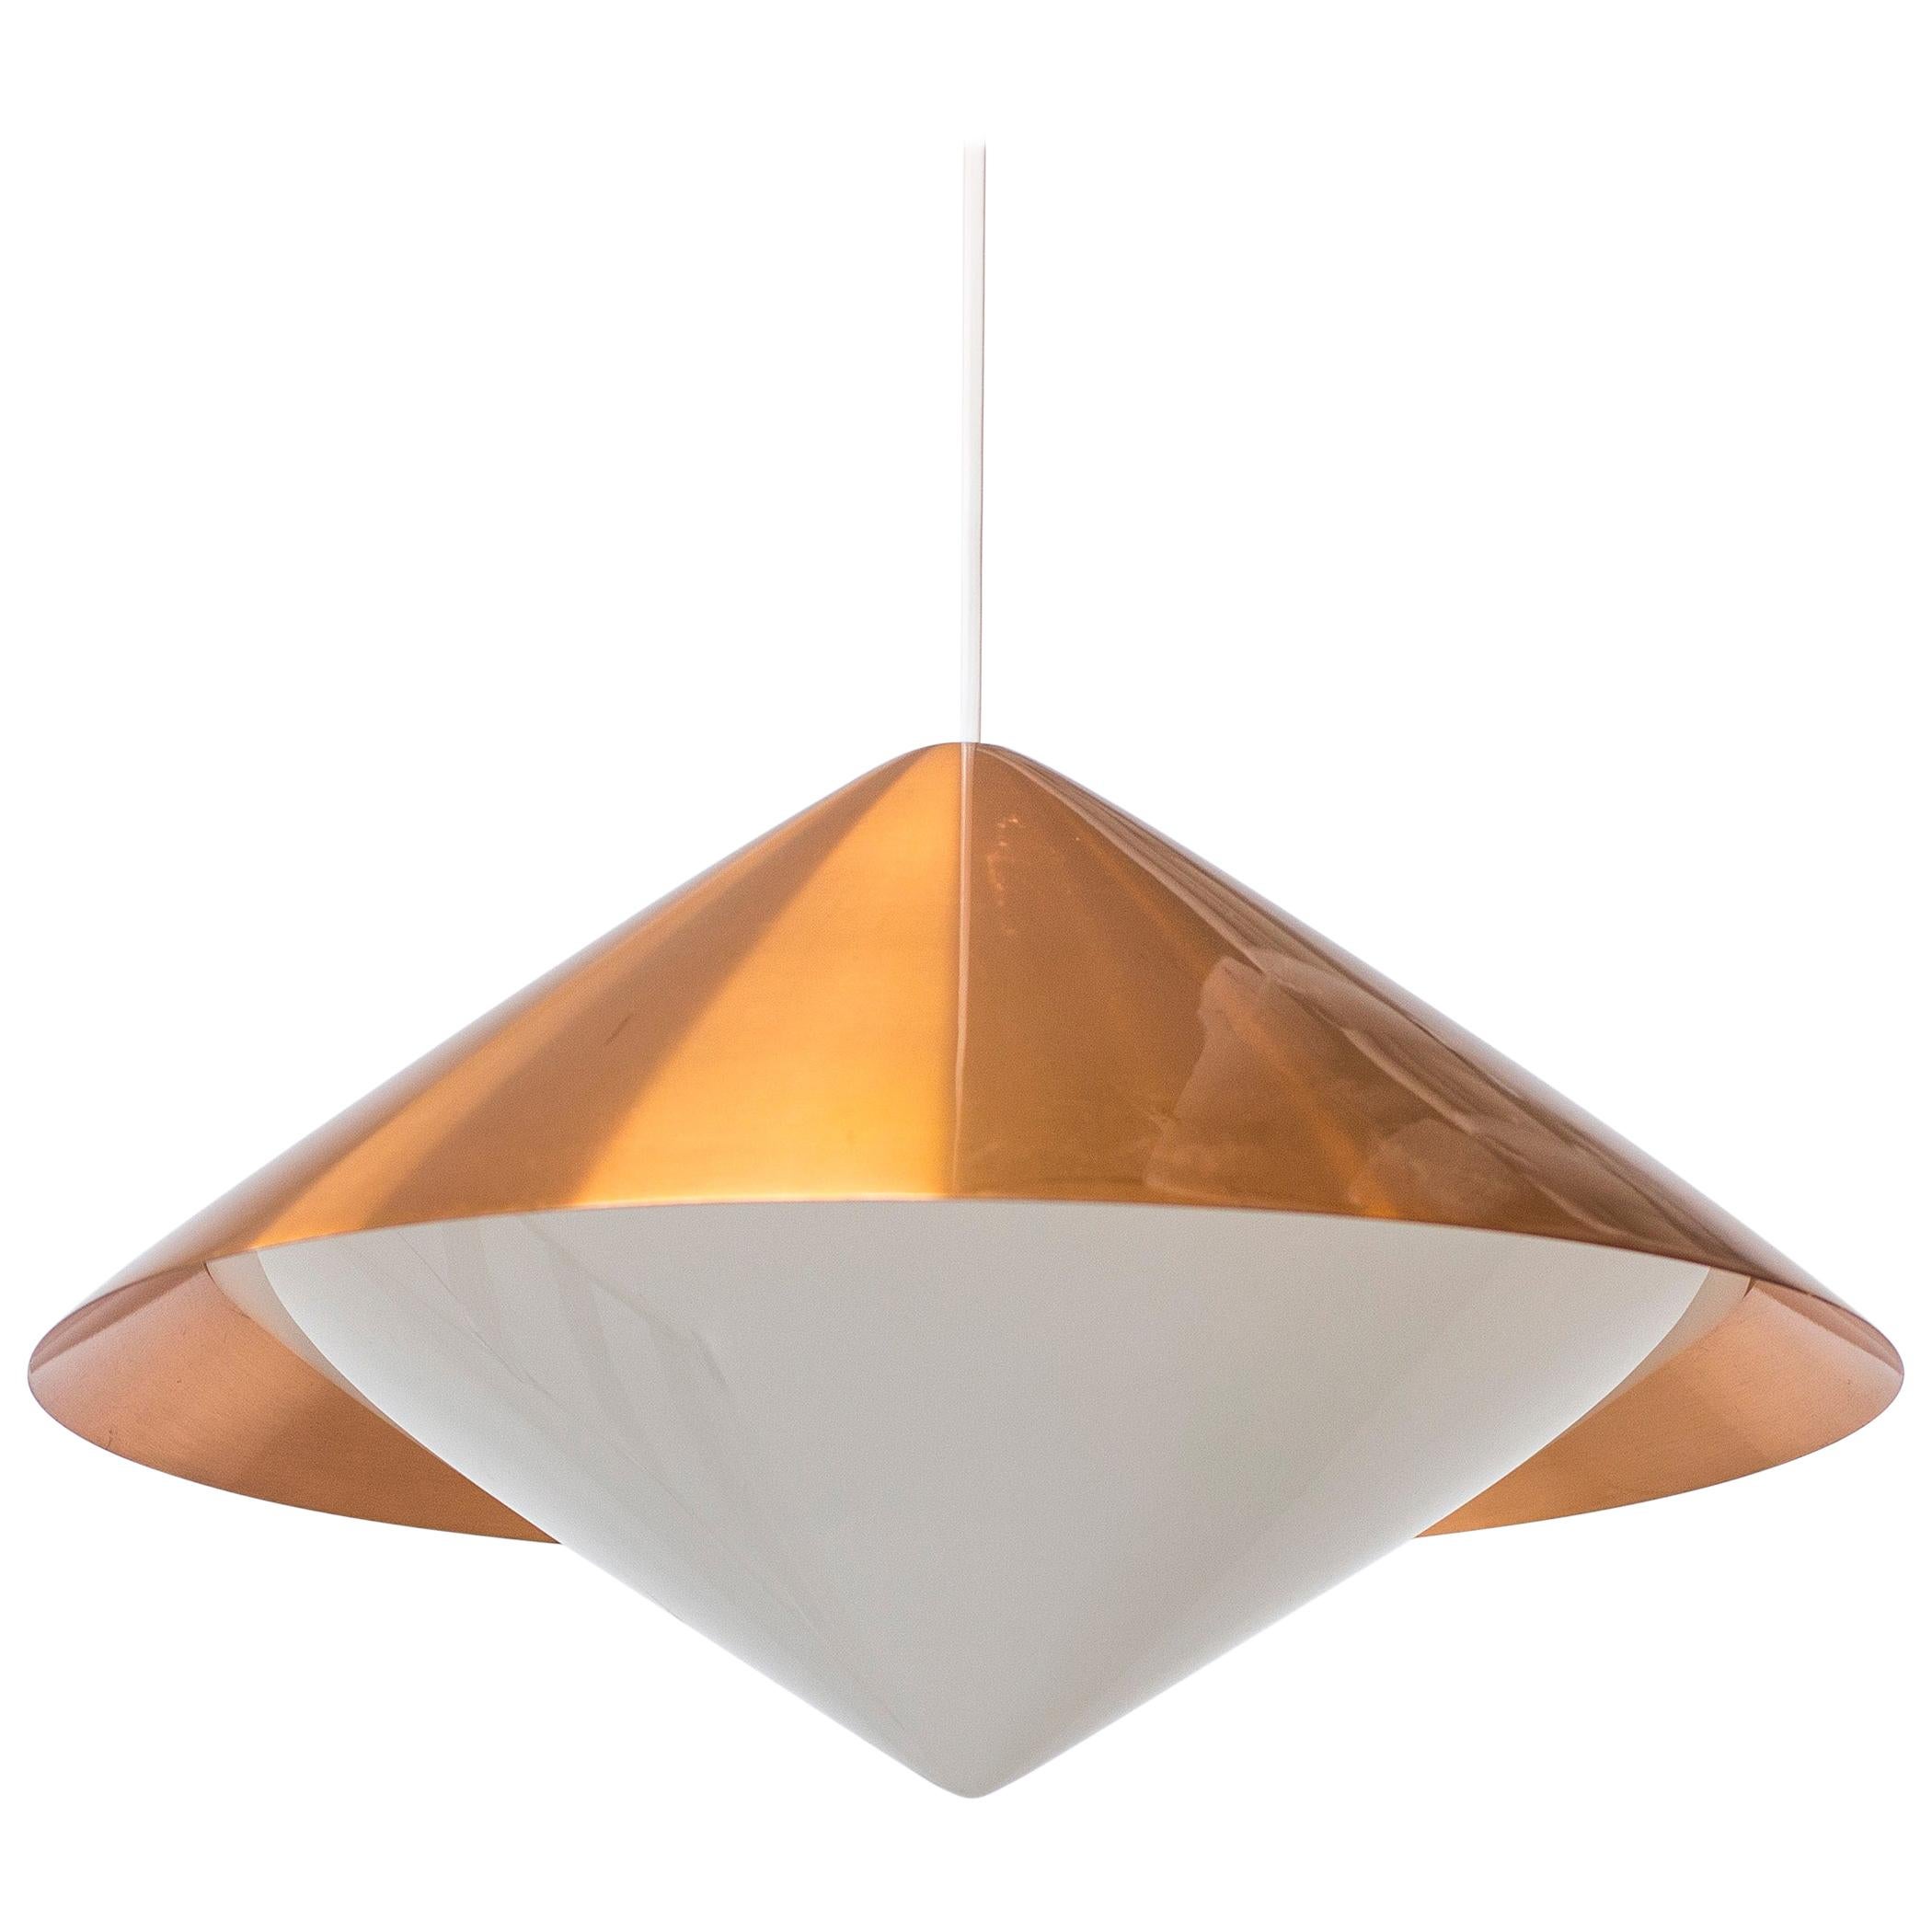 "Kuli" Copper Ceiling Lamp by Svea Winkler for Orno, Finland, 1960s For Sale